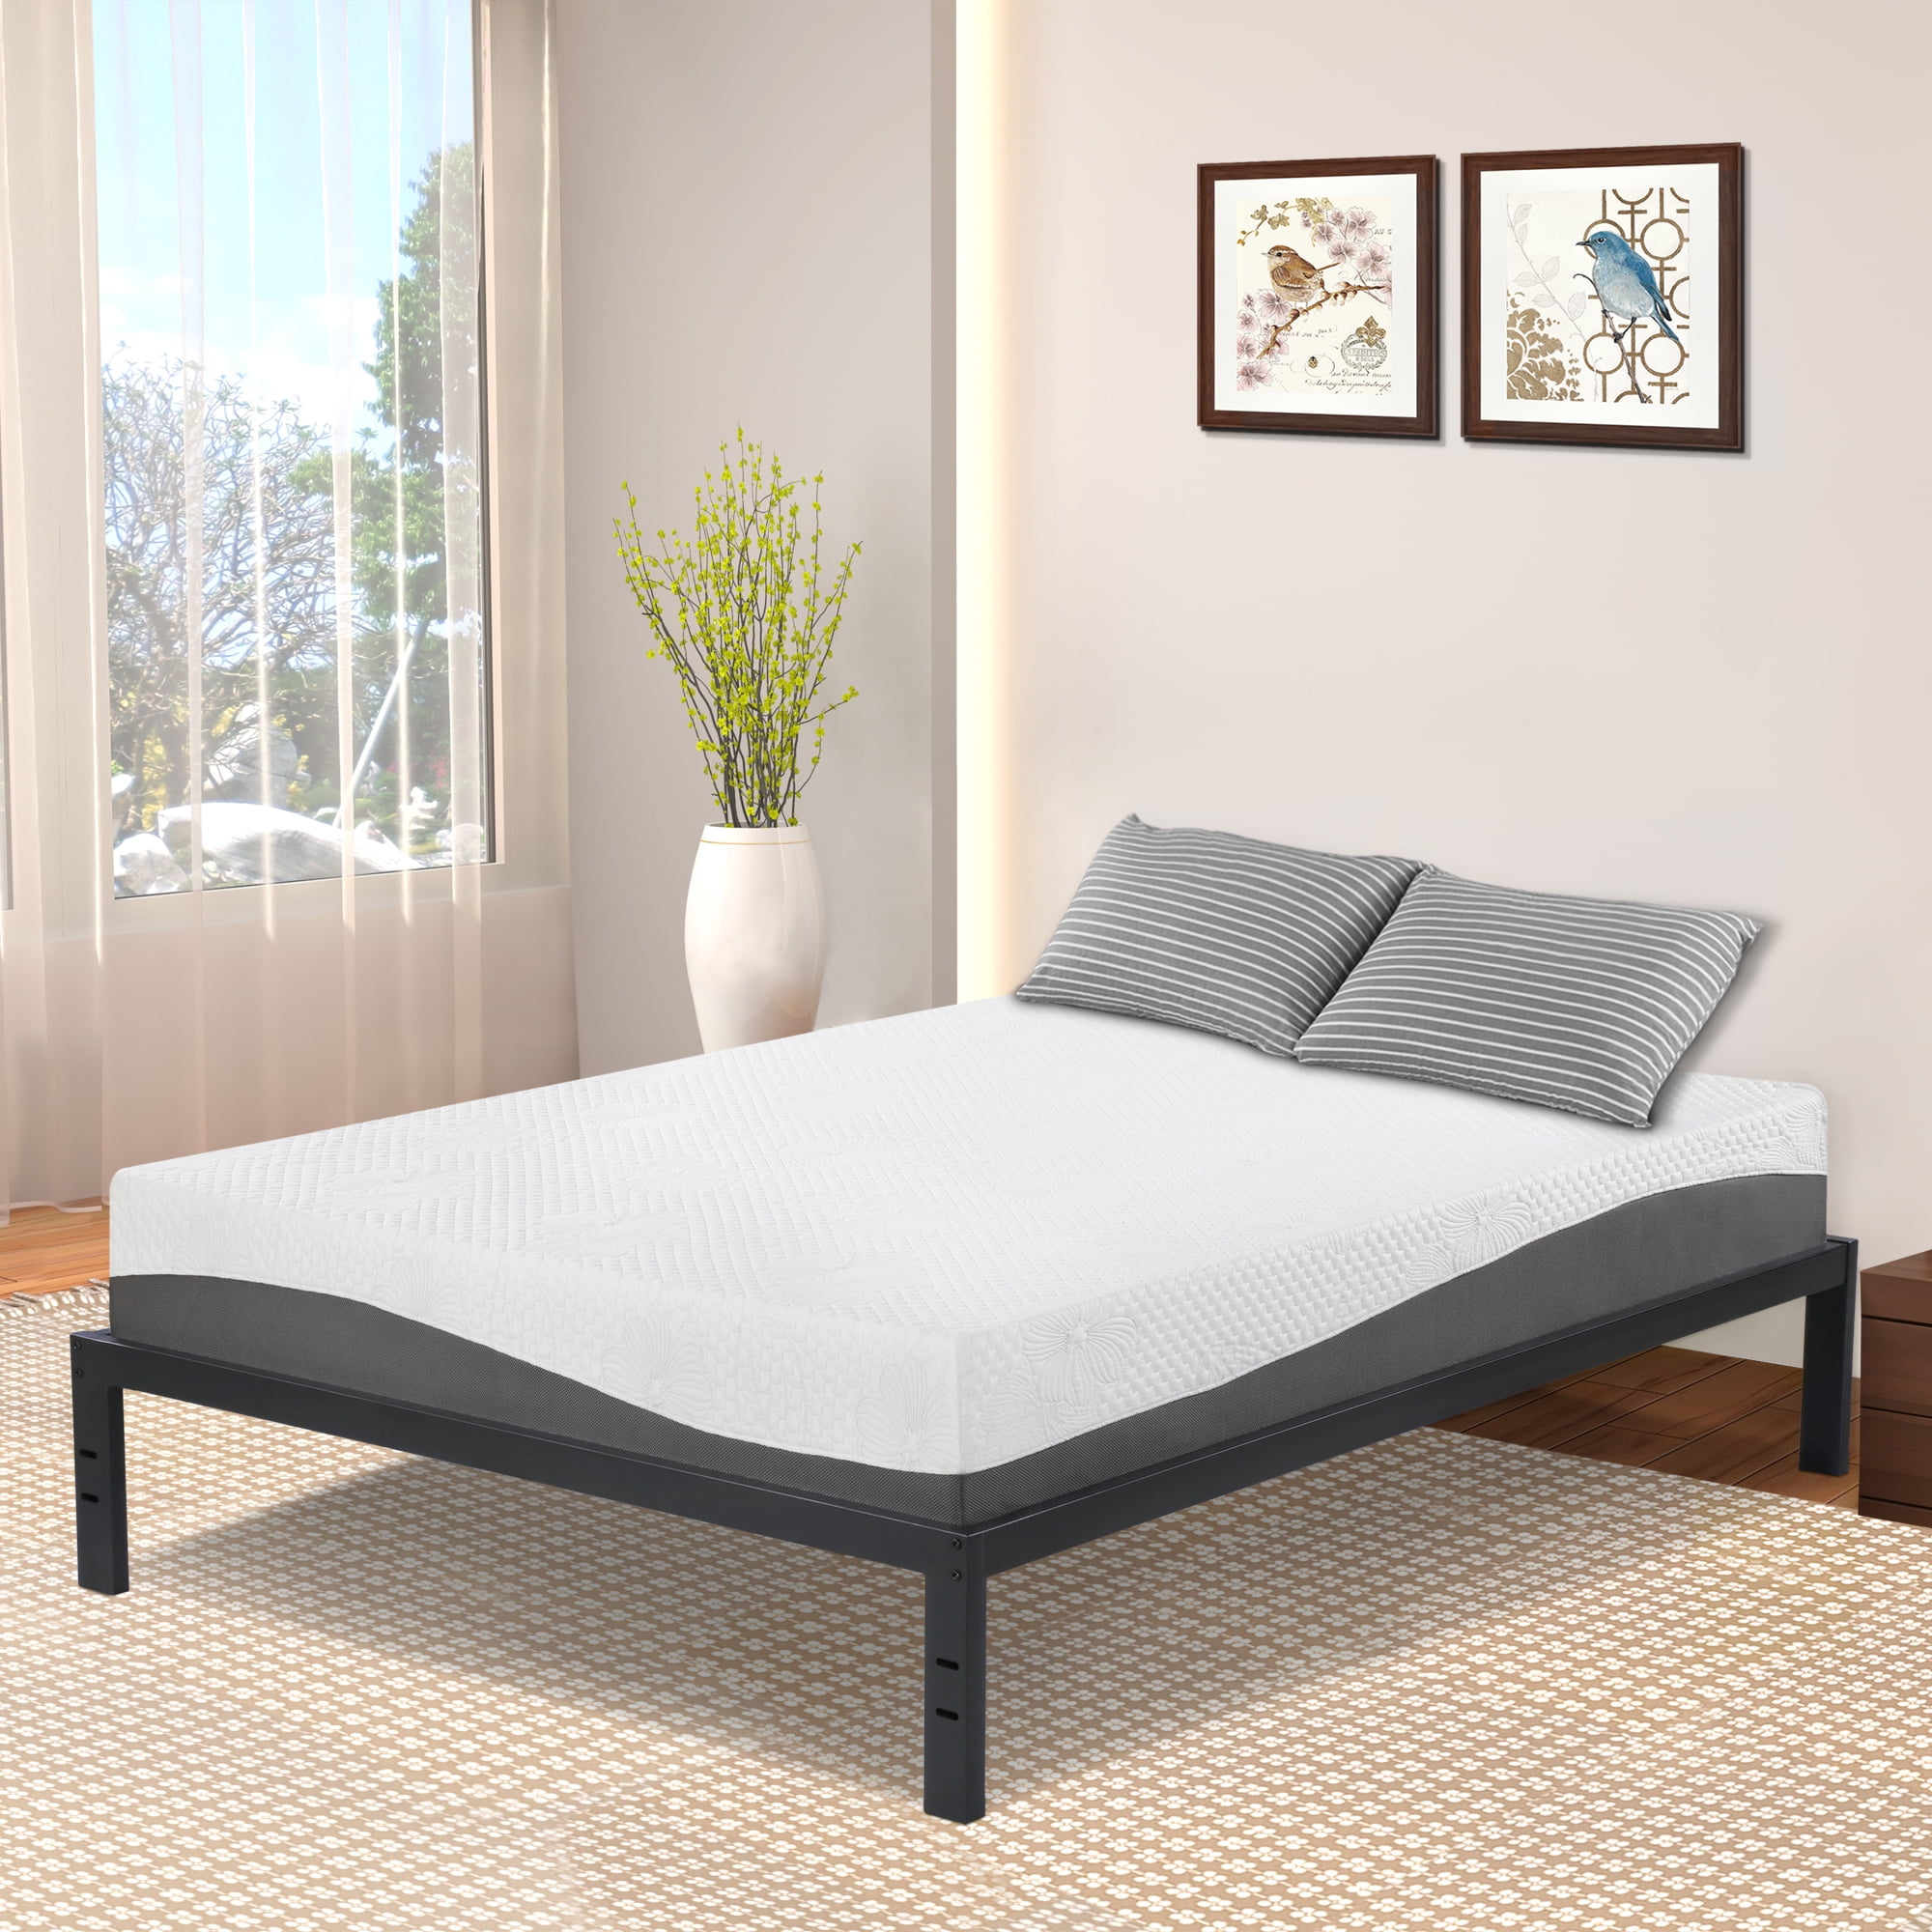 Deluxe Rubberized Plastic Bed Frame End, Metal Bed Frame Gash Guards